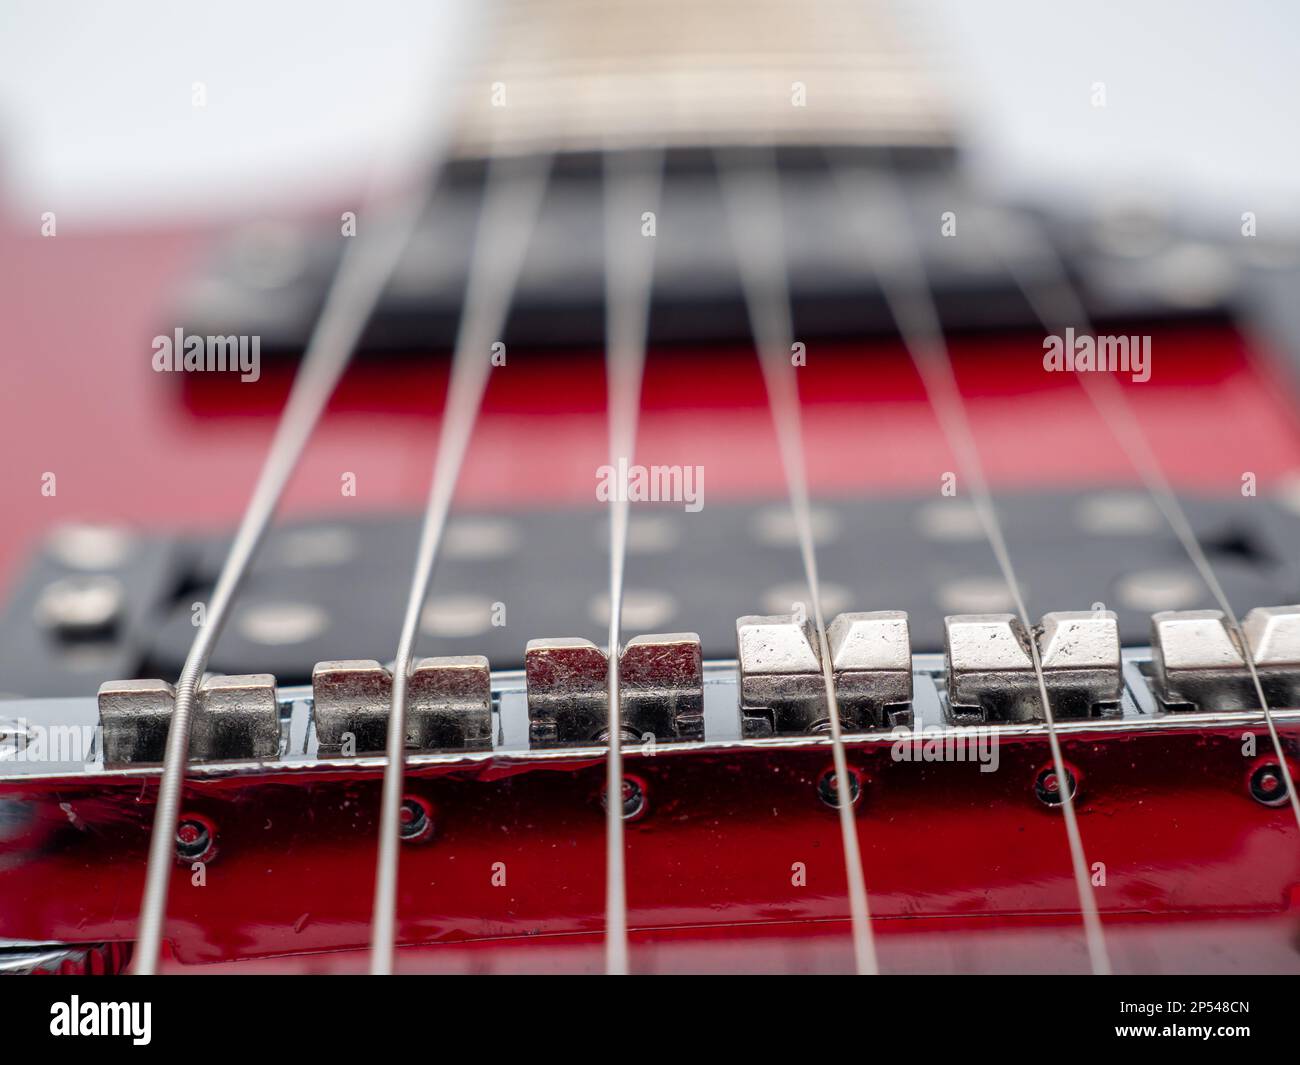 Red electric guitar isolated on white background. Musical instrument guitar. Close-up. Stock Photo